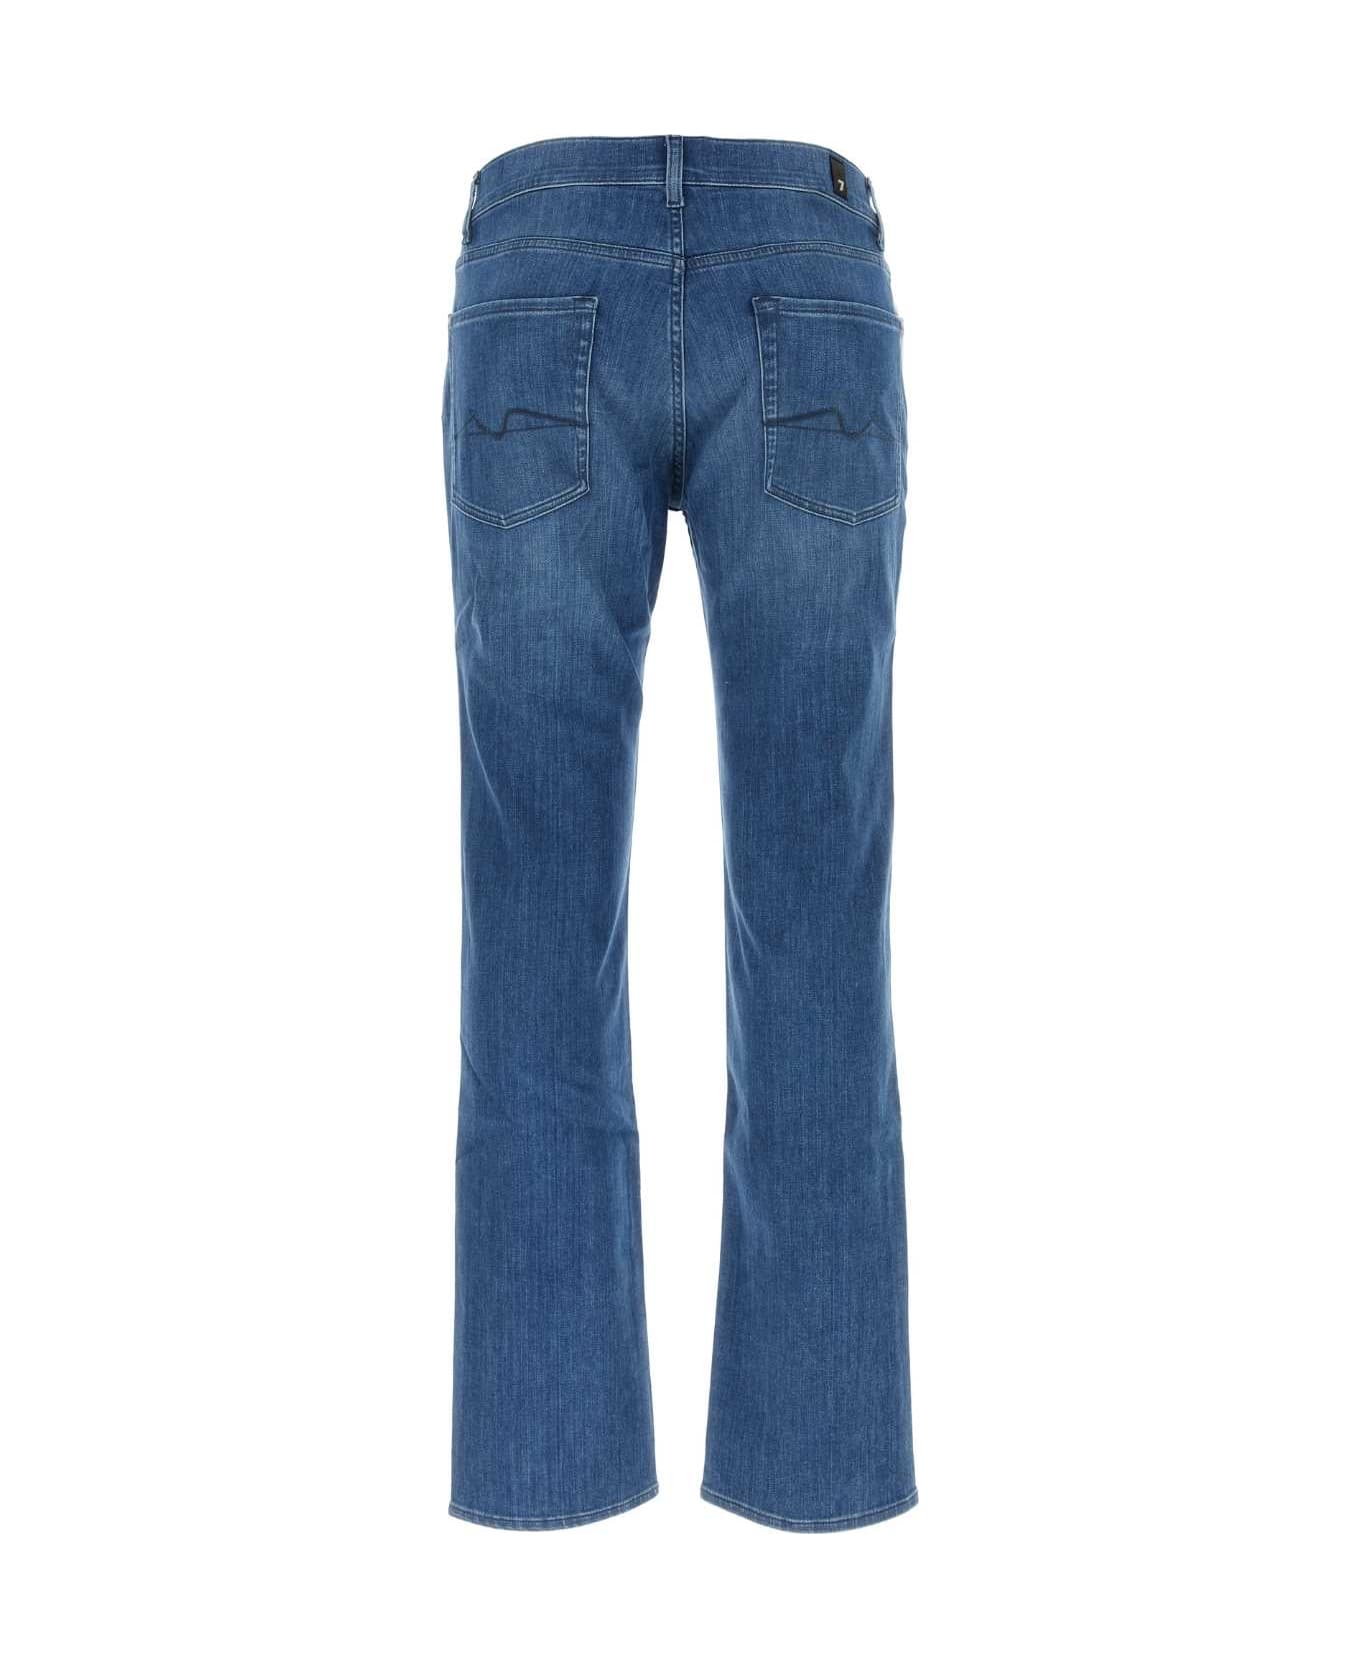 7 For All Mankind Stretch Denim Luxe Performance Jeans - MIDBLUE